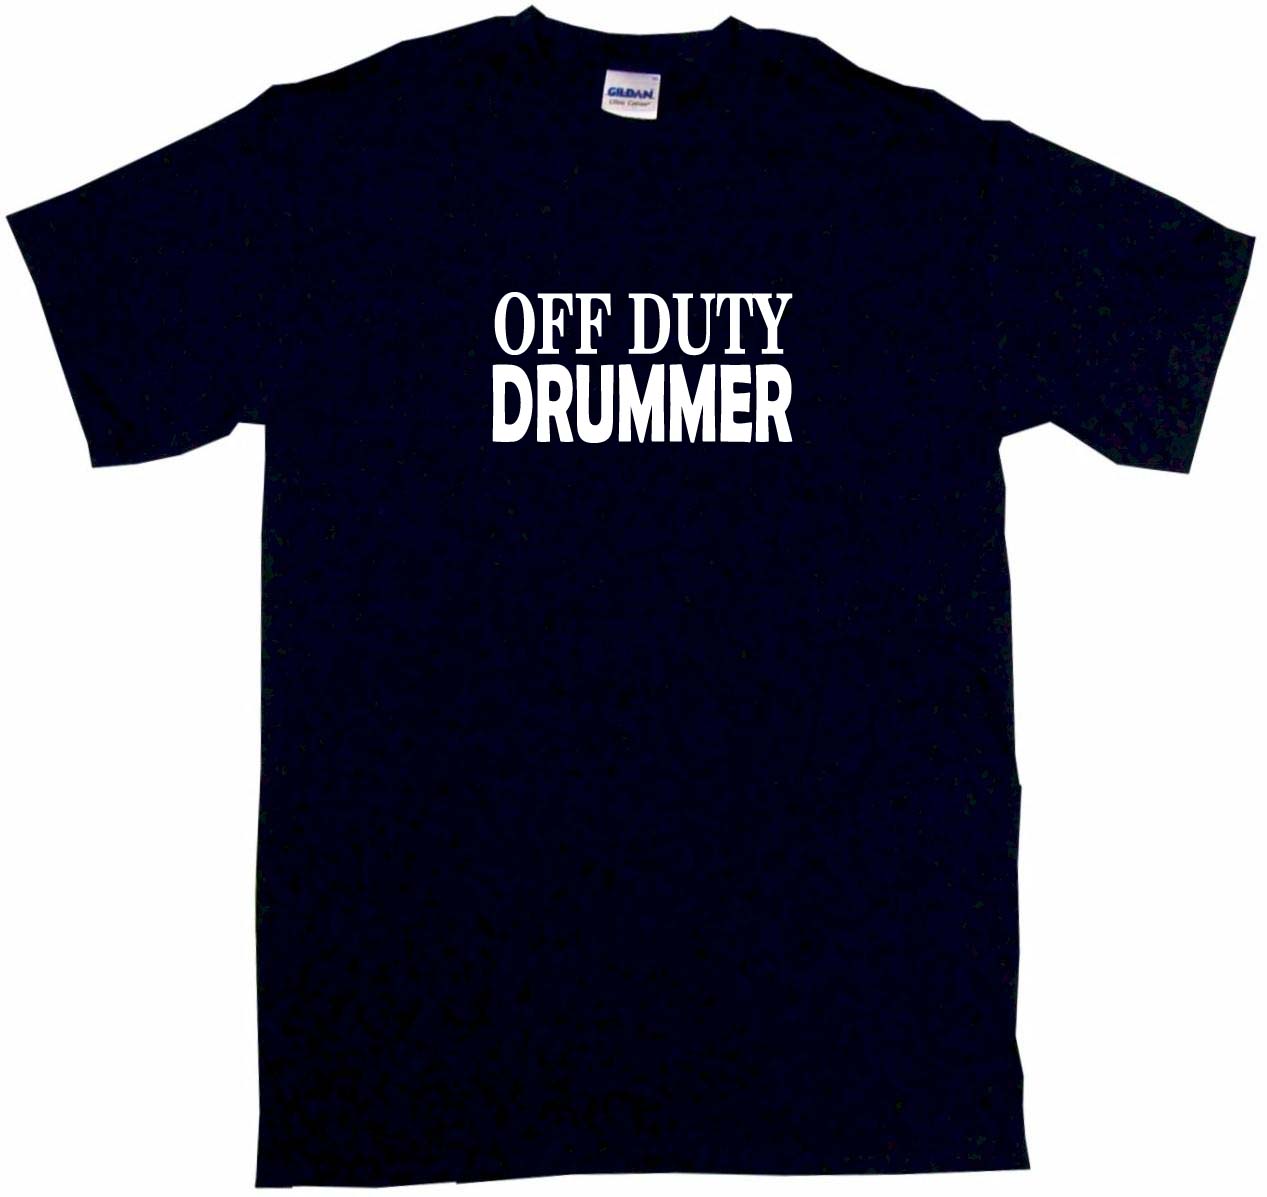 6XL Off Duty Drummer Mens Tee Shirt Pick Size & Color Small 